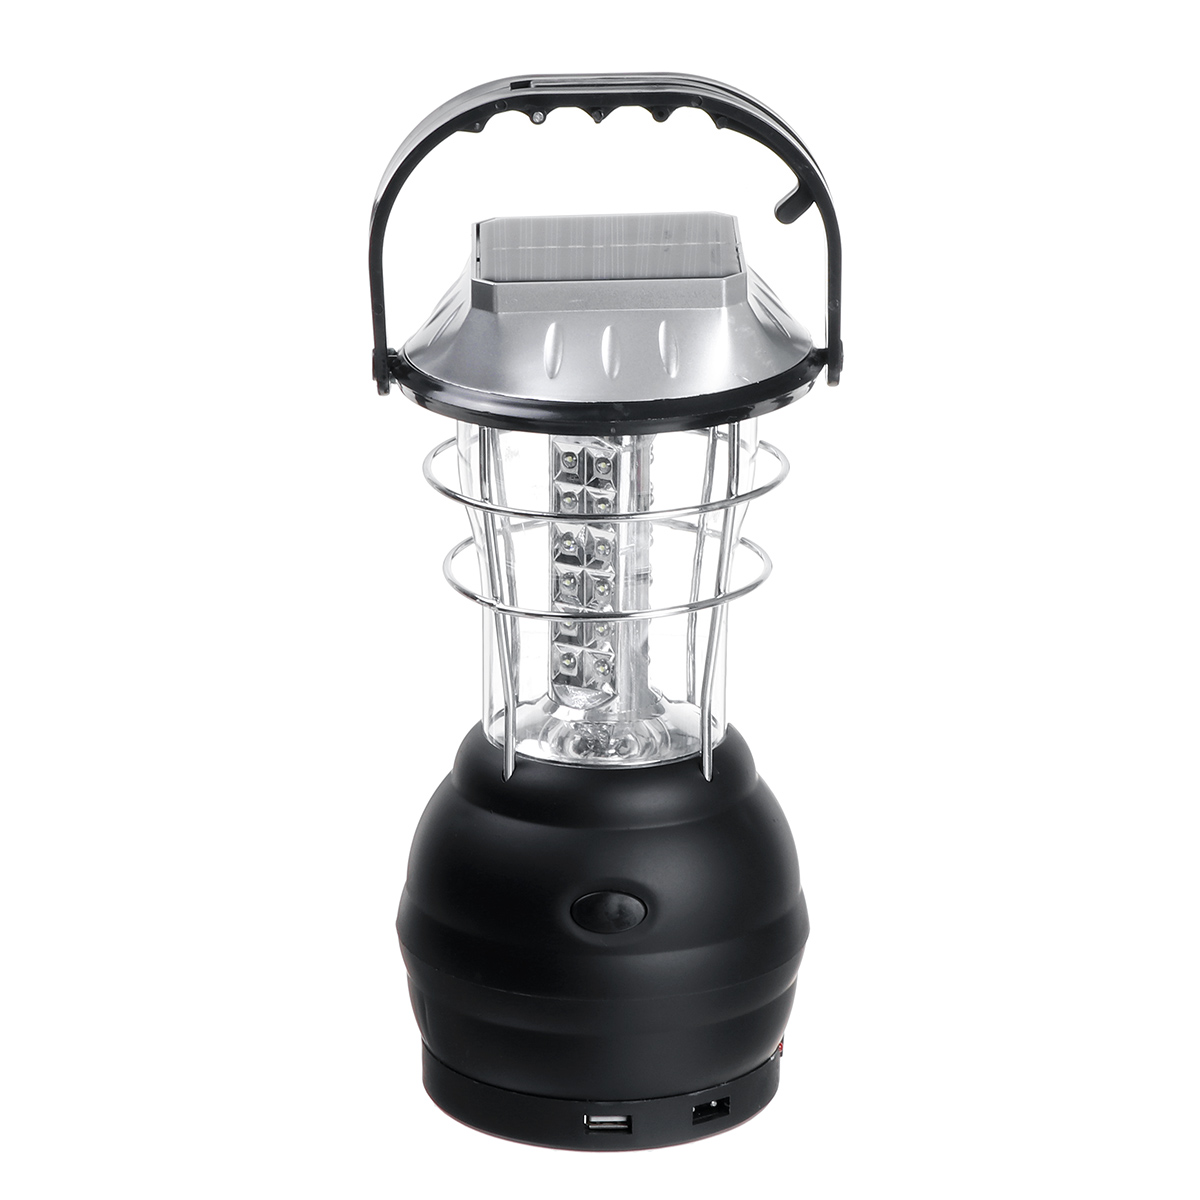 Solar-Emergency-Light-USB-Rechargeable-36LED-Outdoor-Lamp-for-Camping-Hiking-Fishing-1759532-4